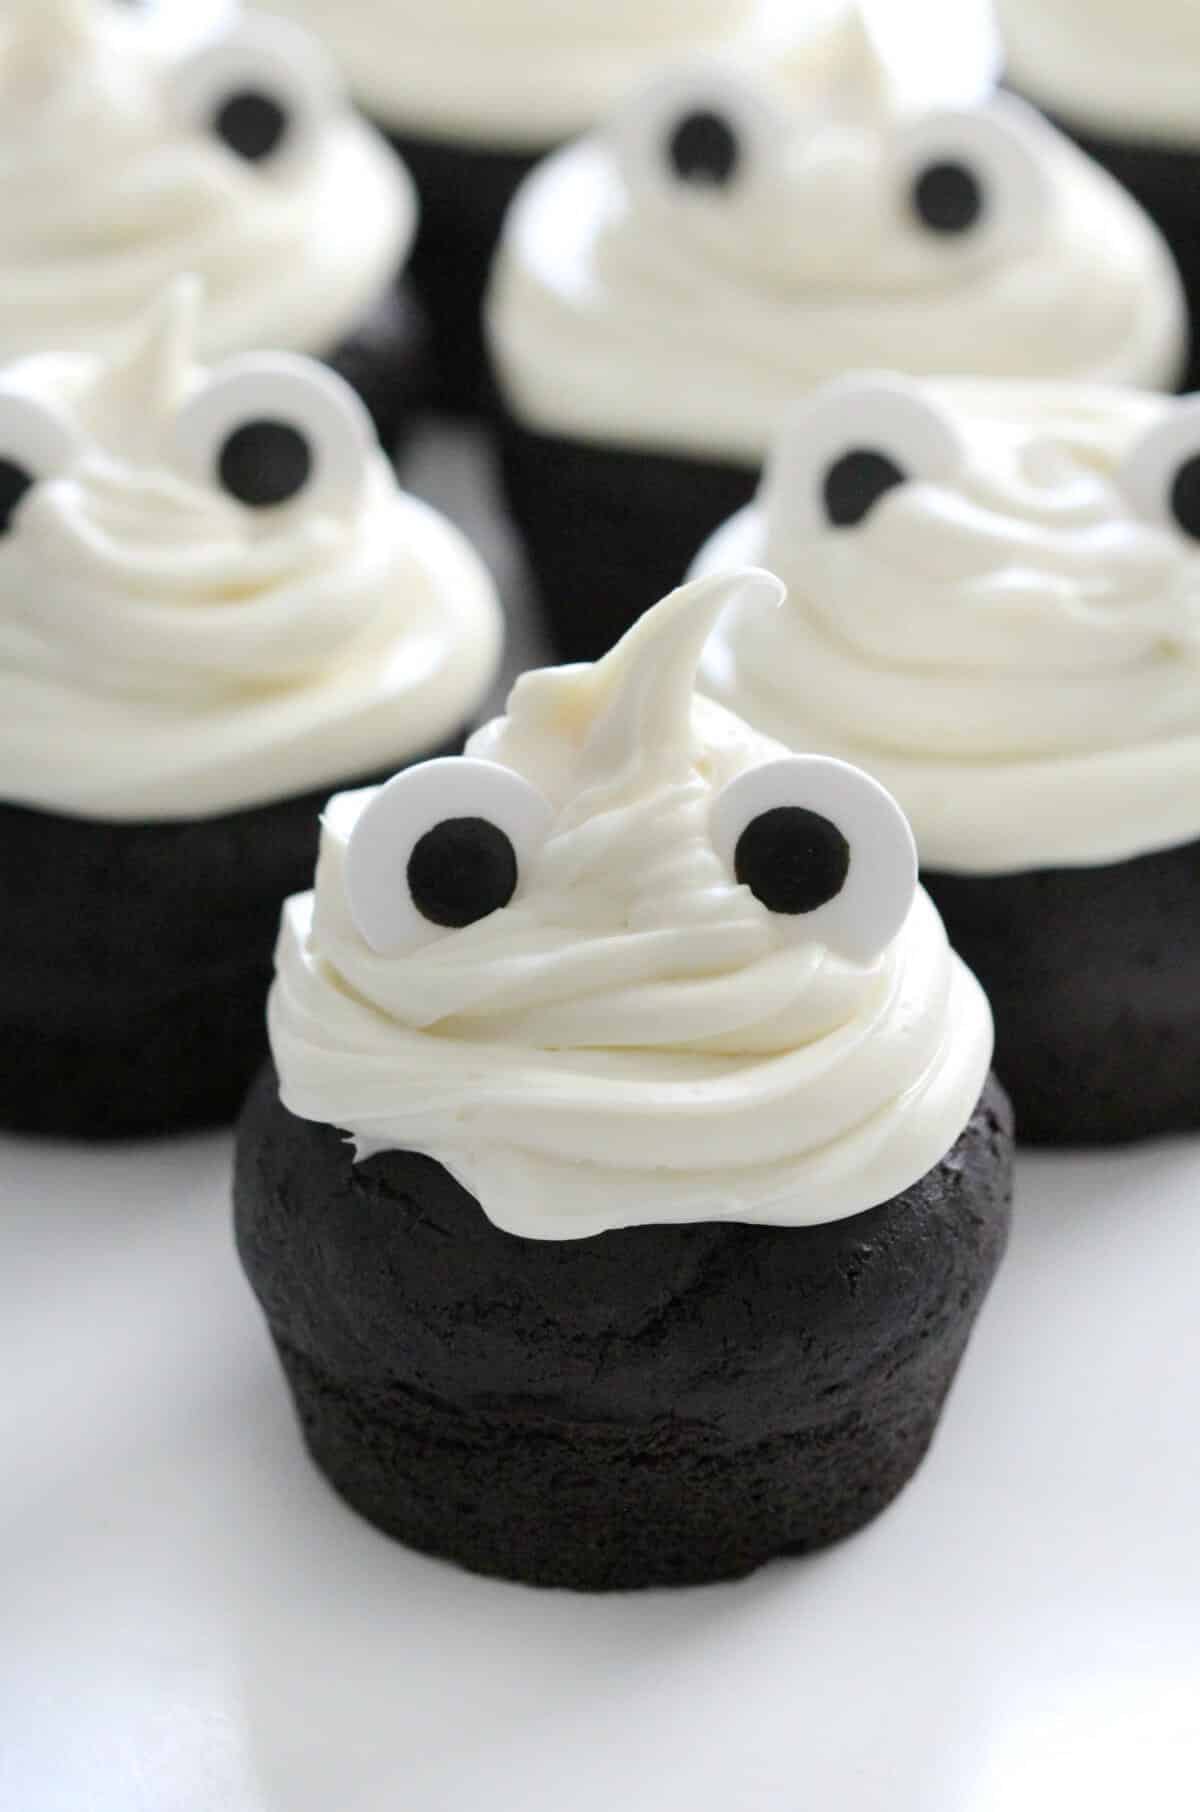 chocolate ghost cupcakes for Halloween decorated with vanilla frosting and candy eyeballs on a white surface